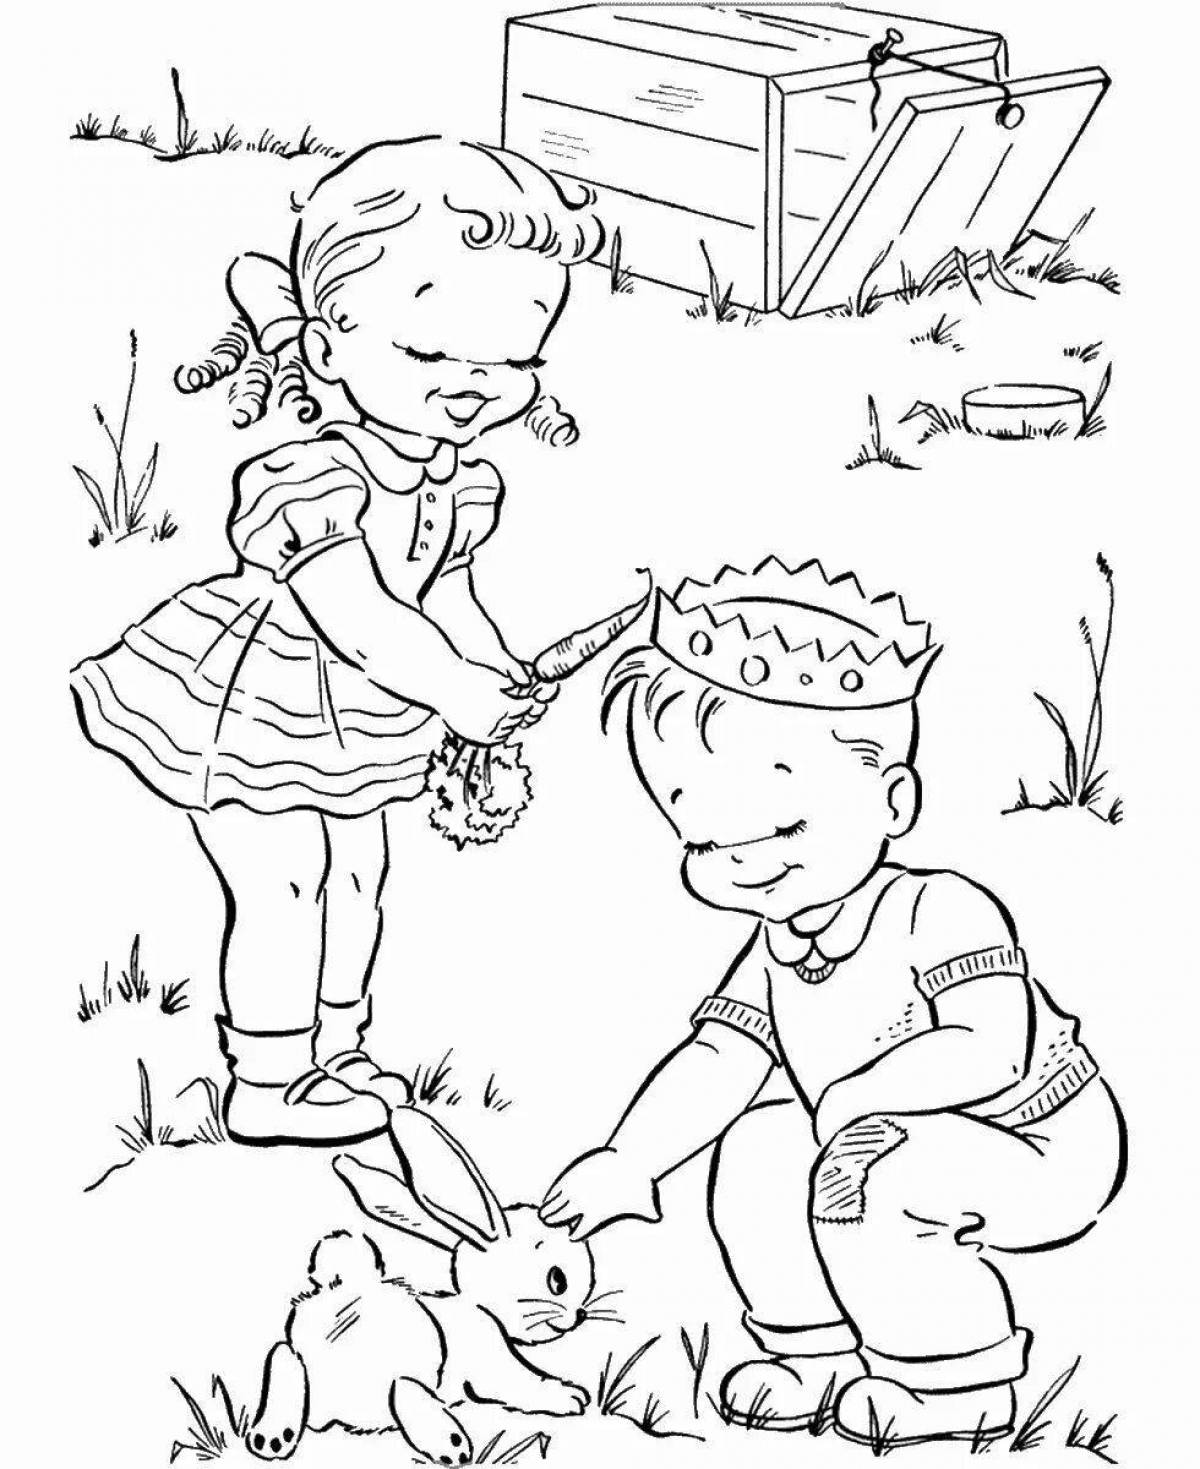 Updating the coloring page save nature